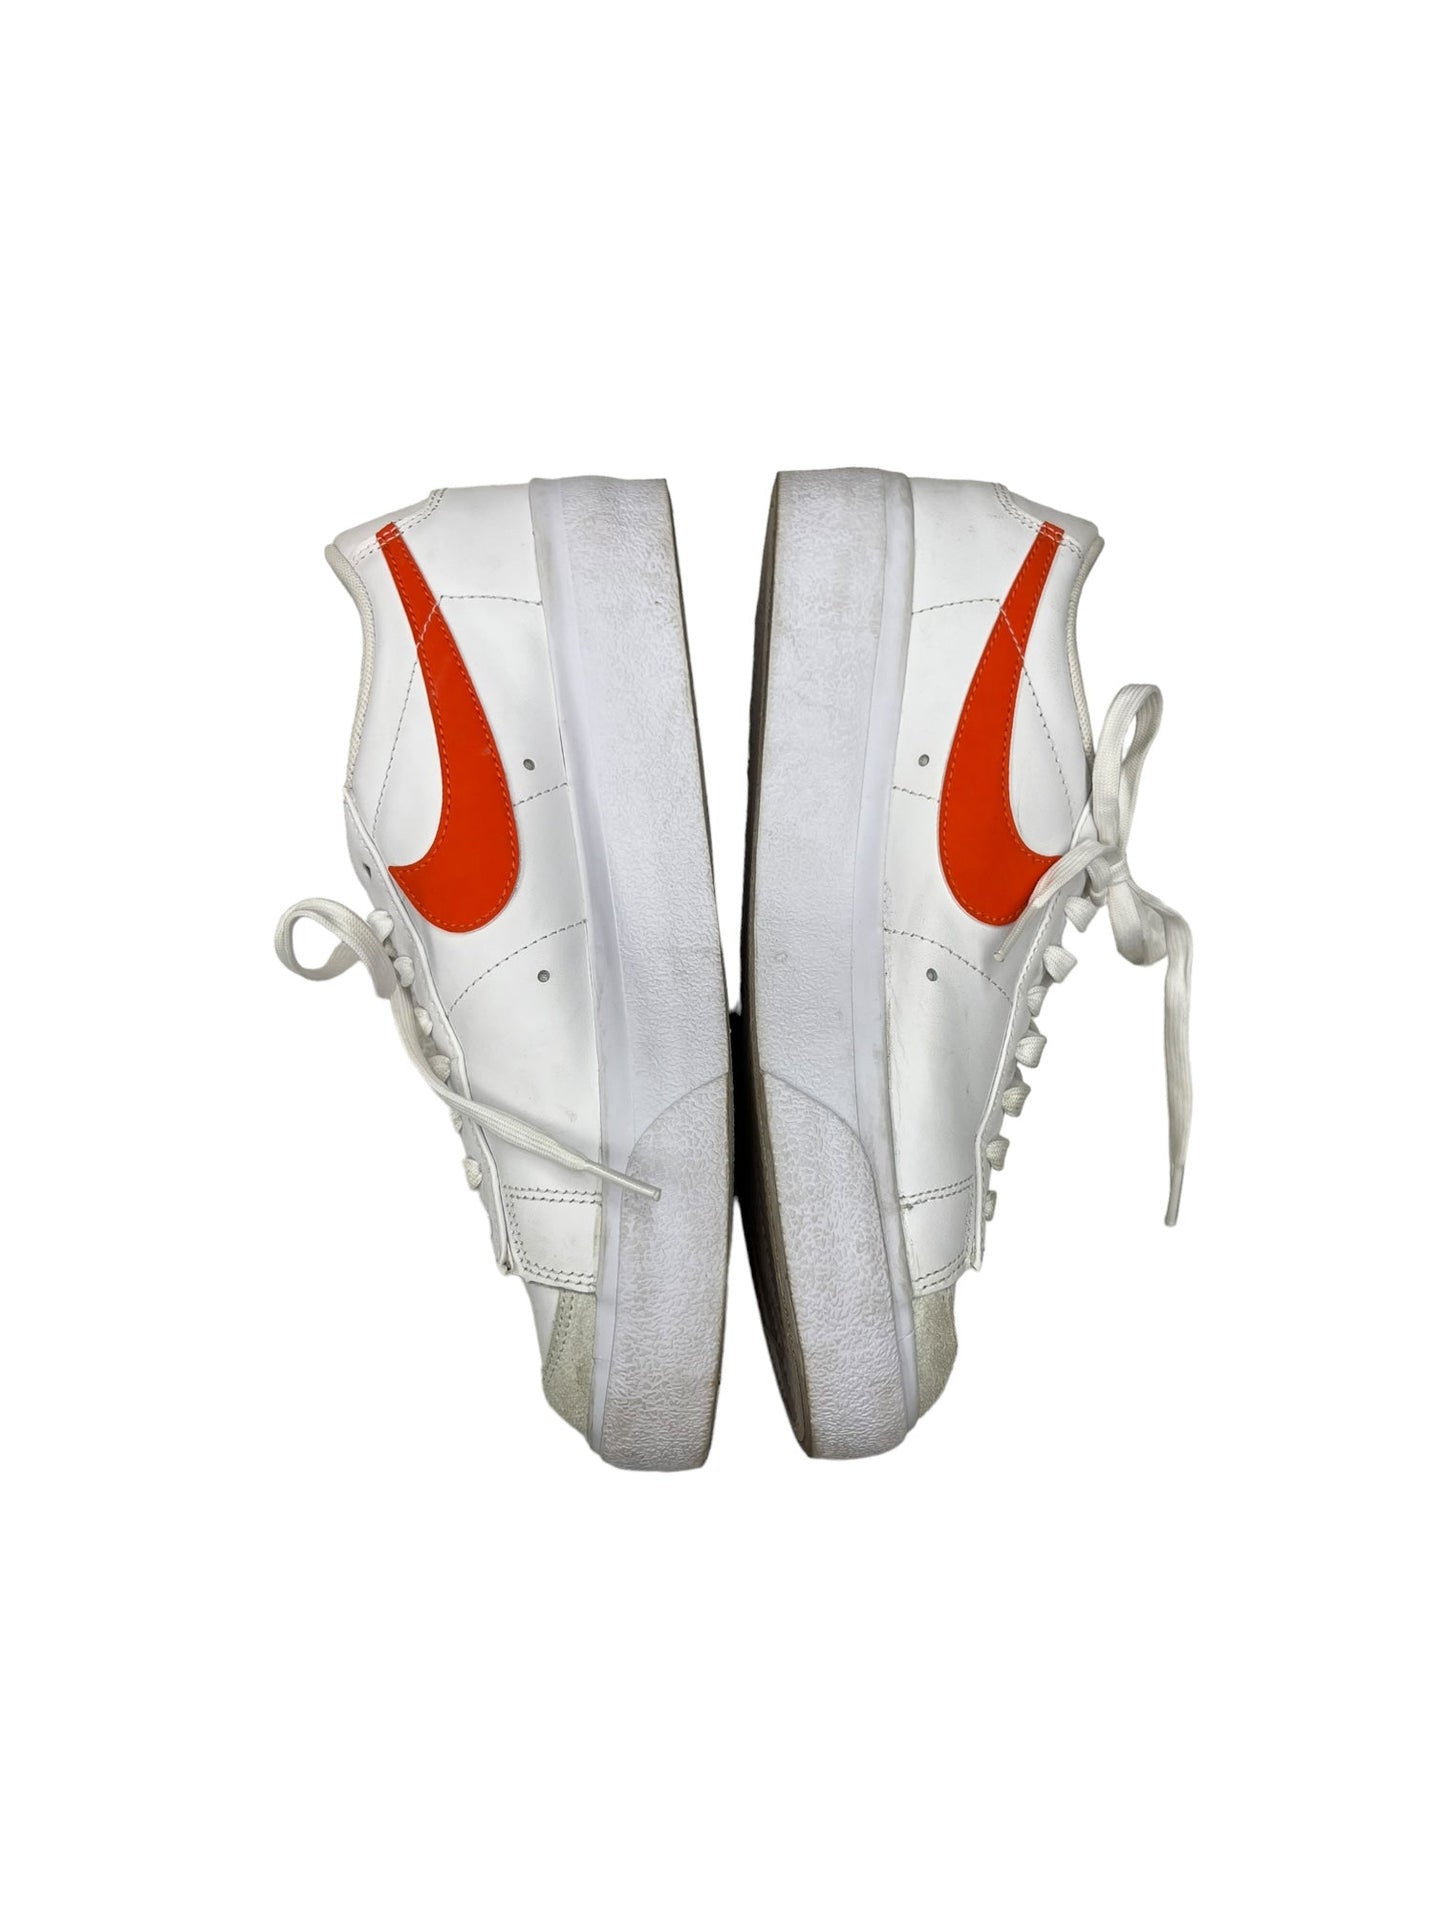 White Shoes Sneakers Nike, Size 9